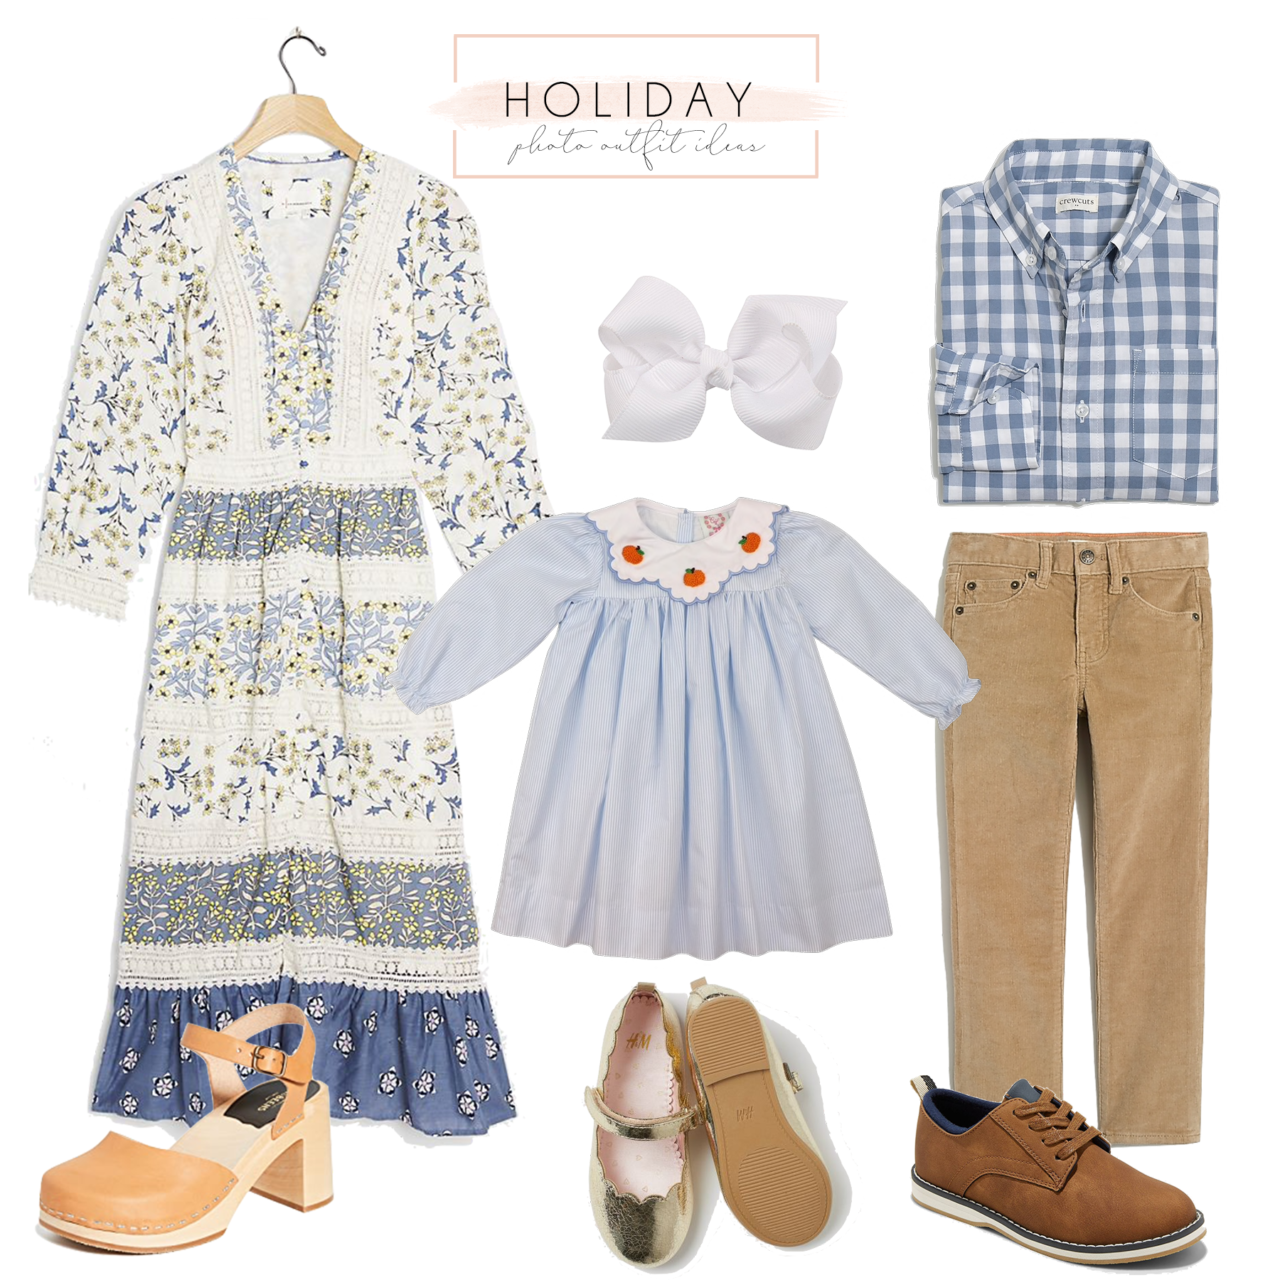 Family Holiday Photo Outfit Ideas